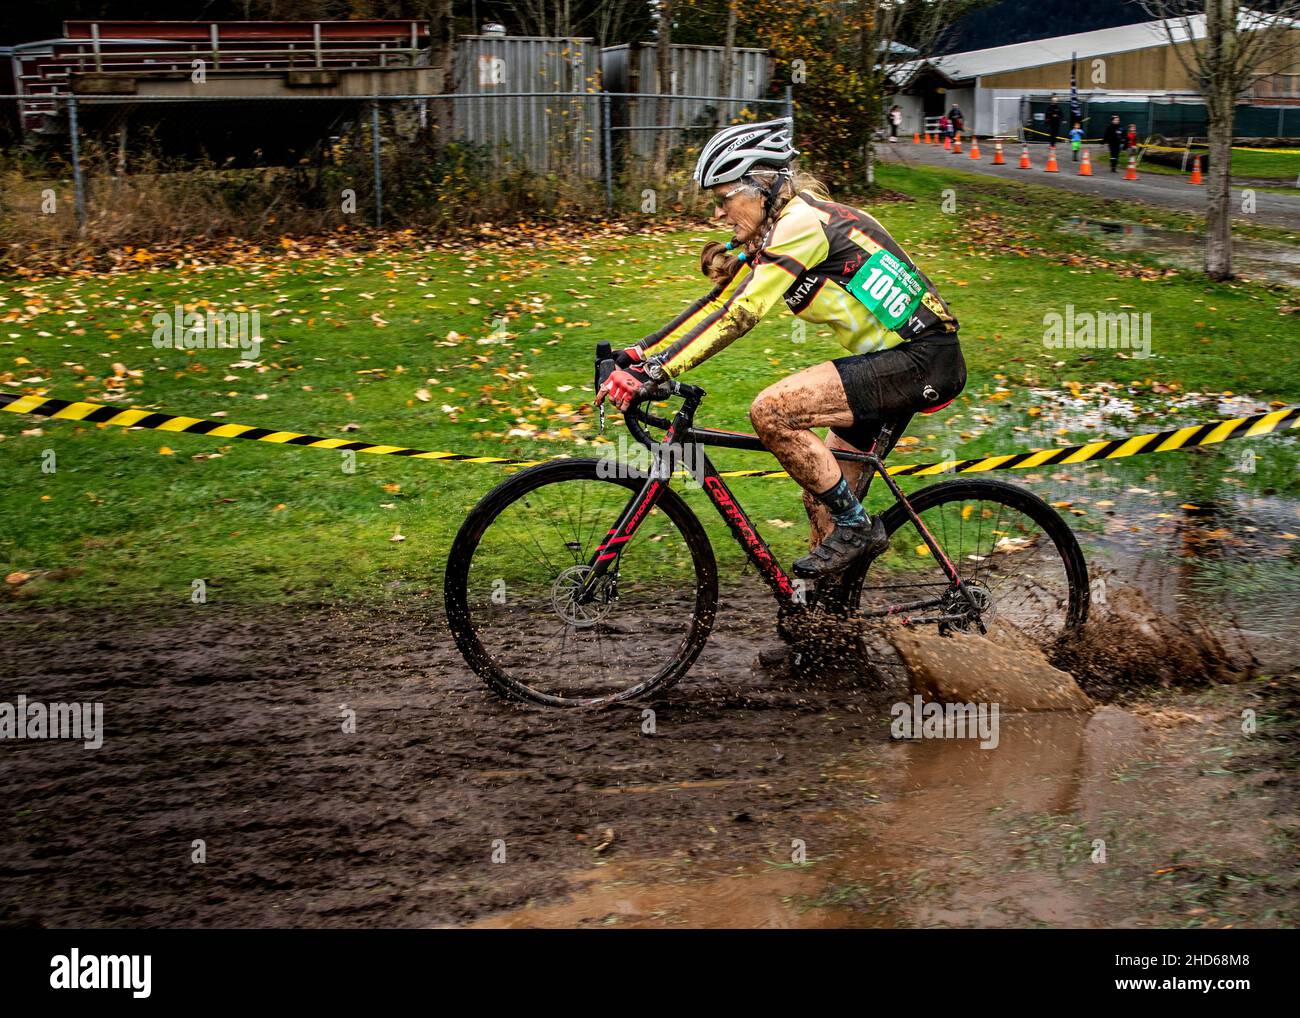 WA20602-00....WASHINGTON - Vicky Spring a 68 year old woman cyclocross racer.  MR# S1 Stock Photo